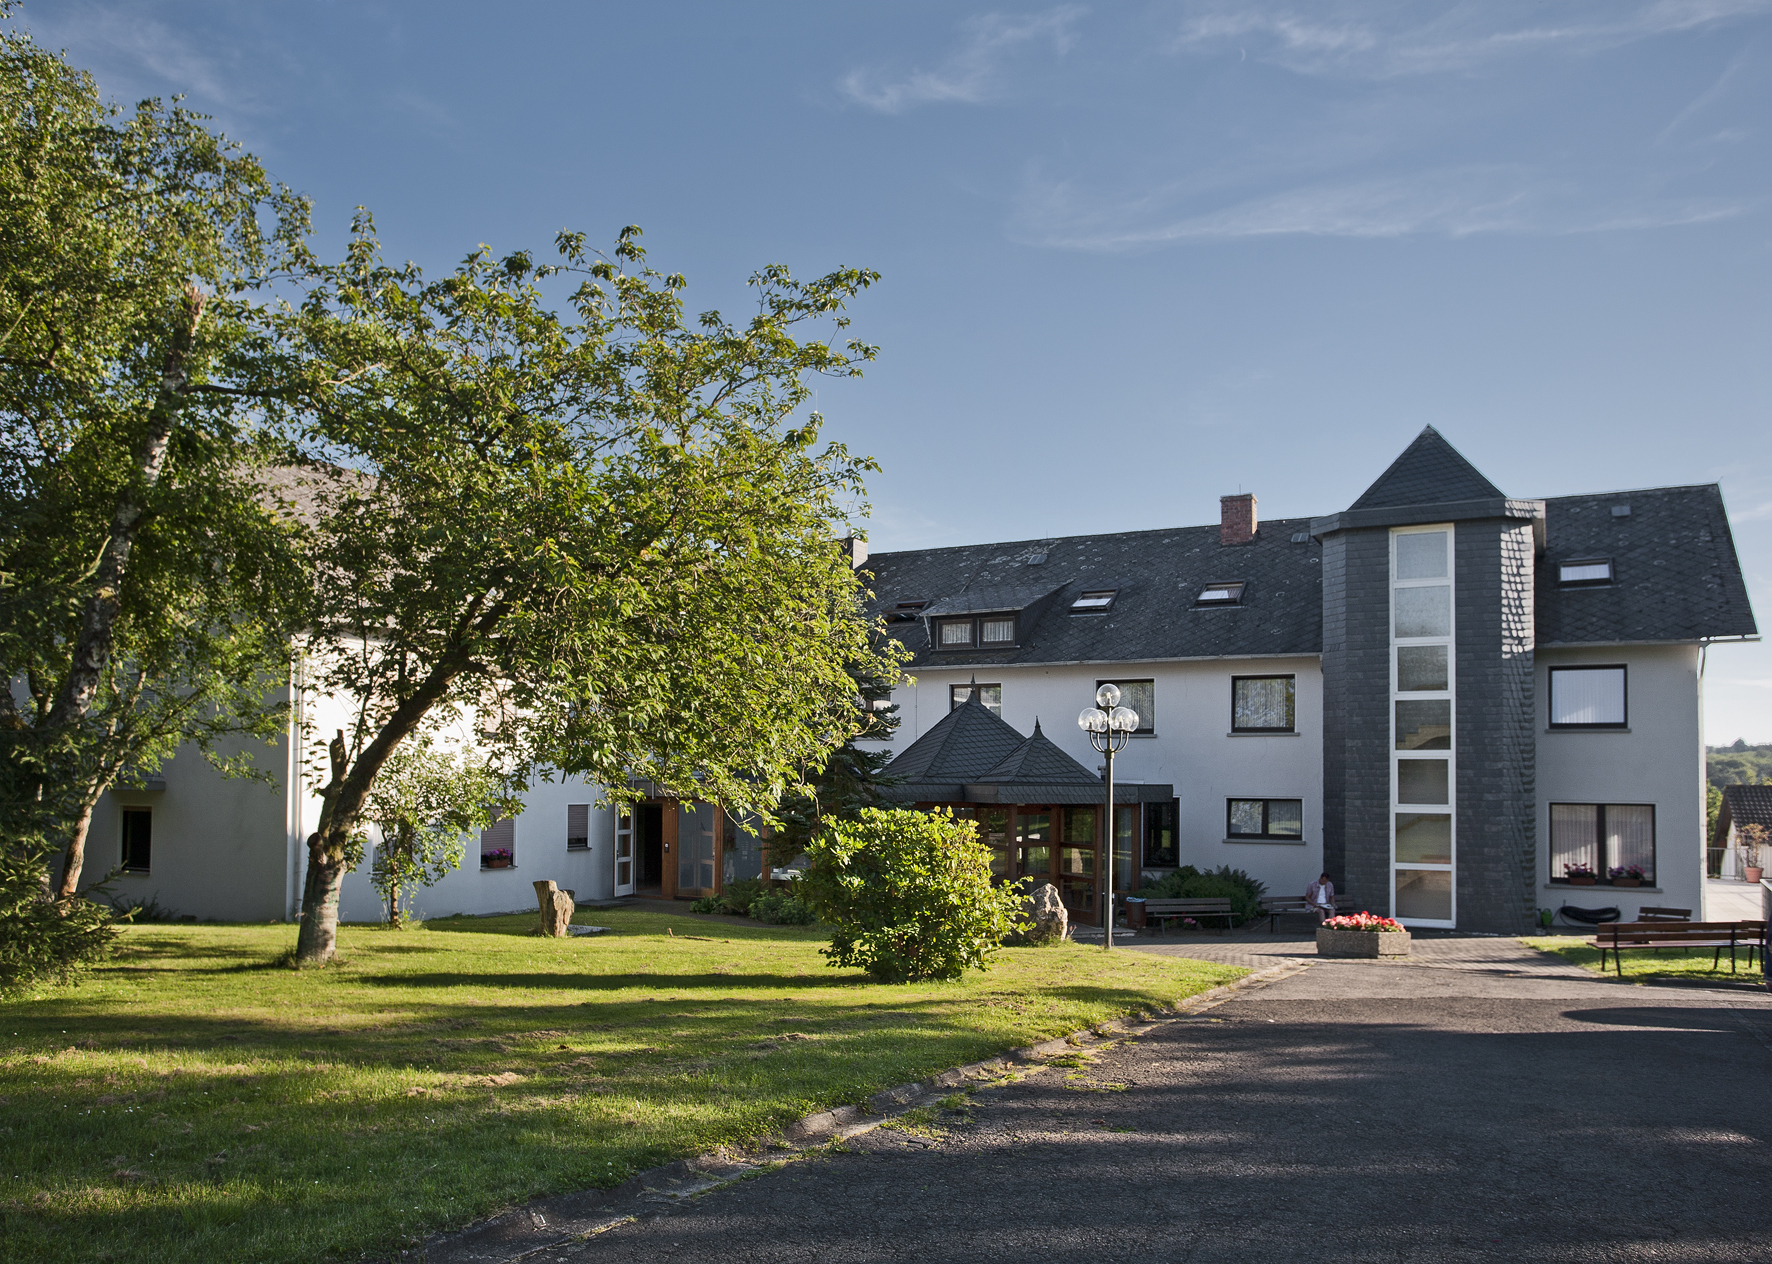 Landhotel Karrenberg <br/>70.67 ew <br/> <a href='http://vakantieoplossing.nl/outpage/?id=9f18ed051f6fd00f3cd9f65a6293c85a' target='_blank'>View Details</a>